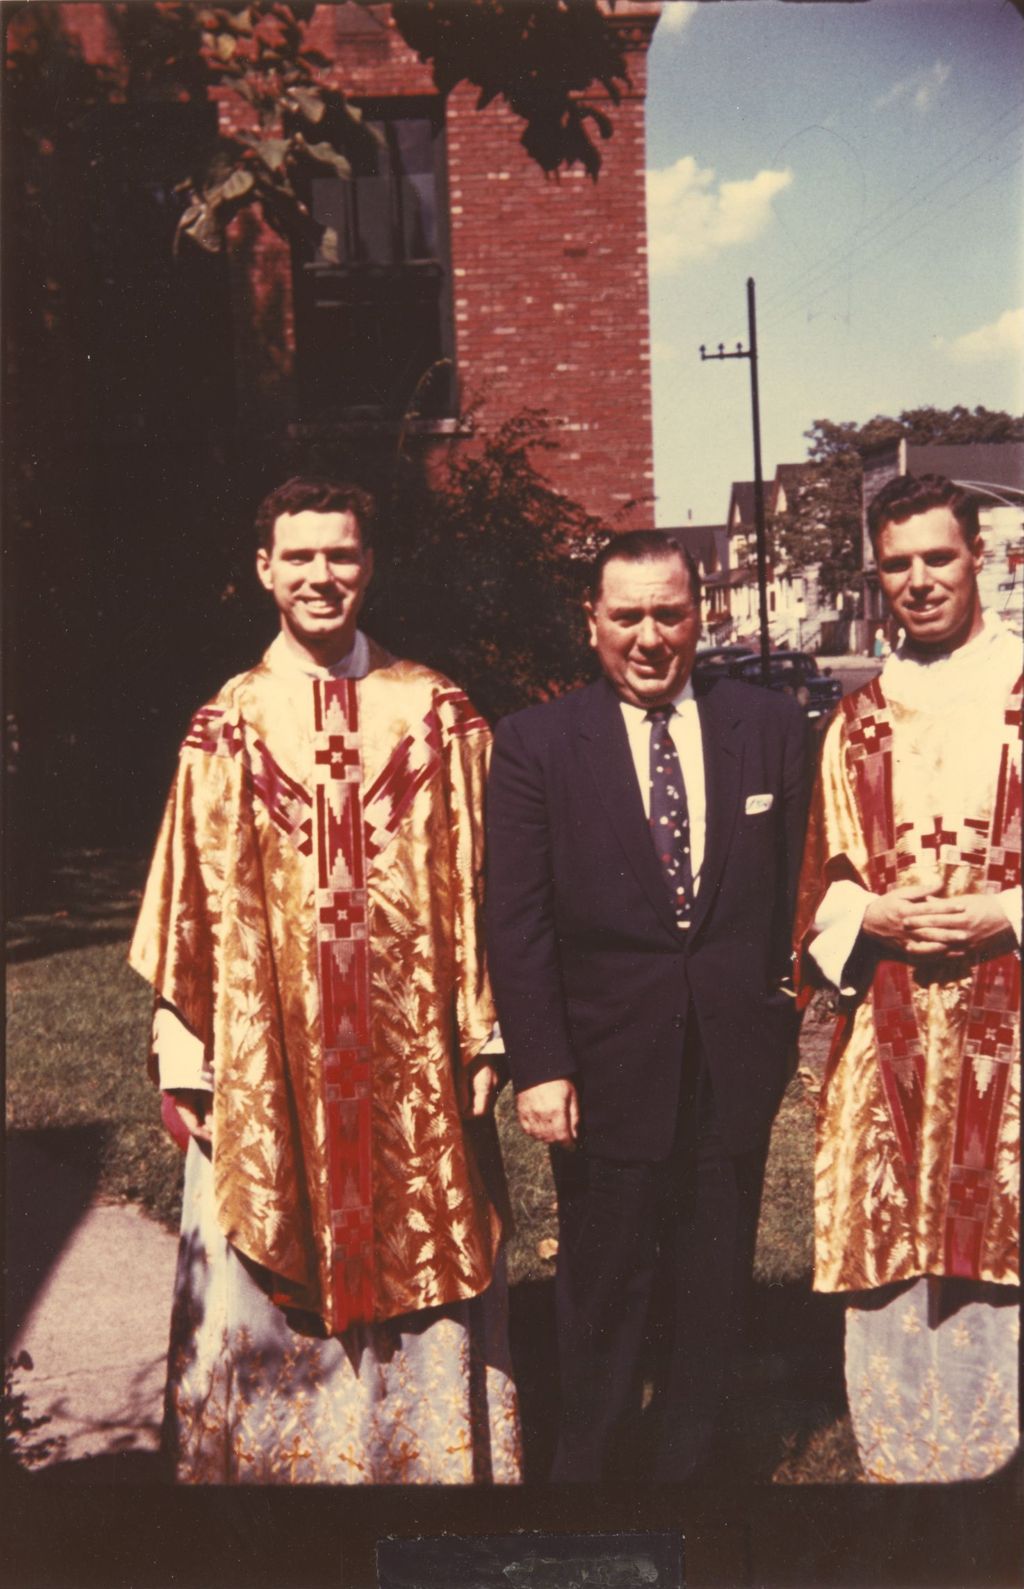 Miniature of Richard J. Daley with two priests